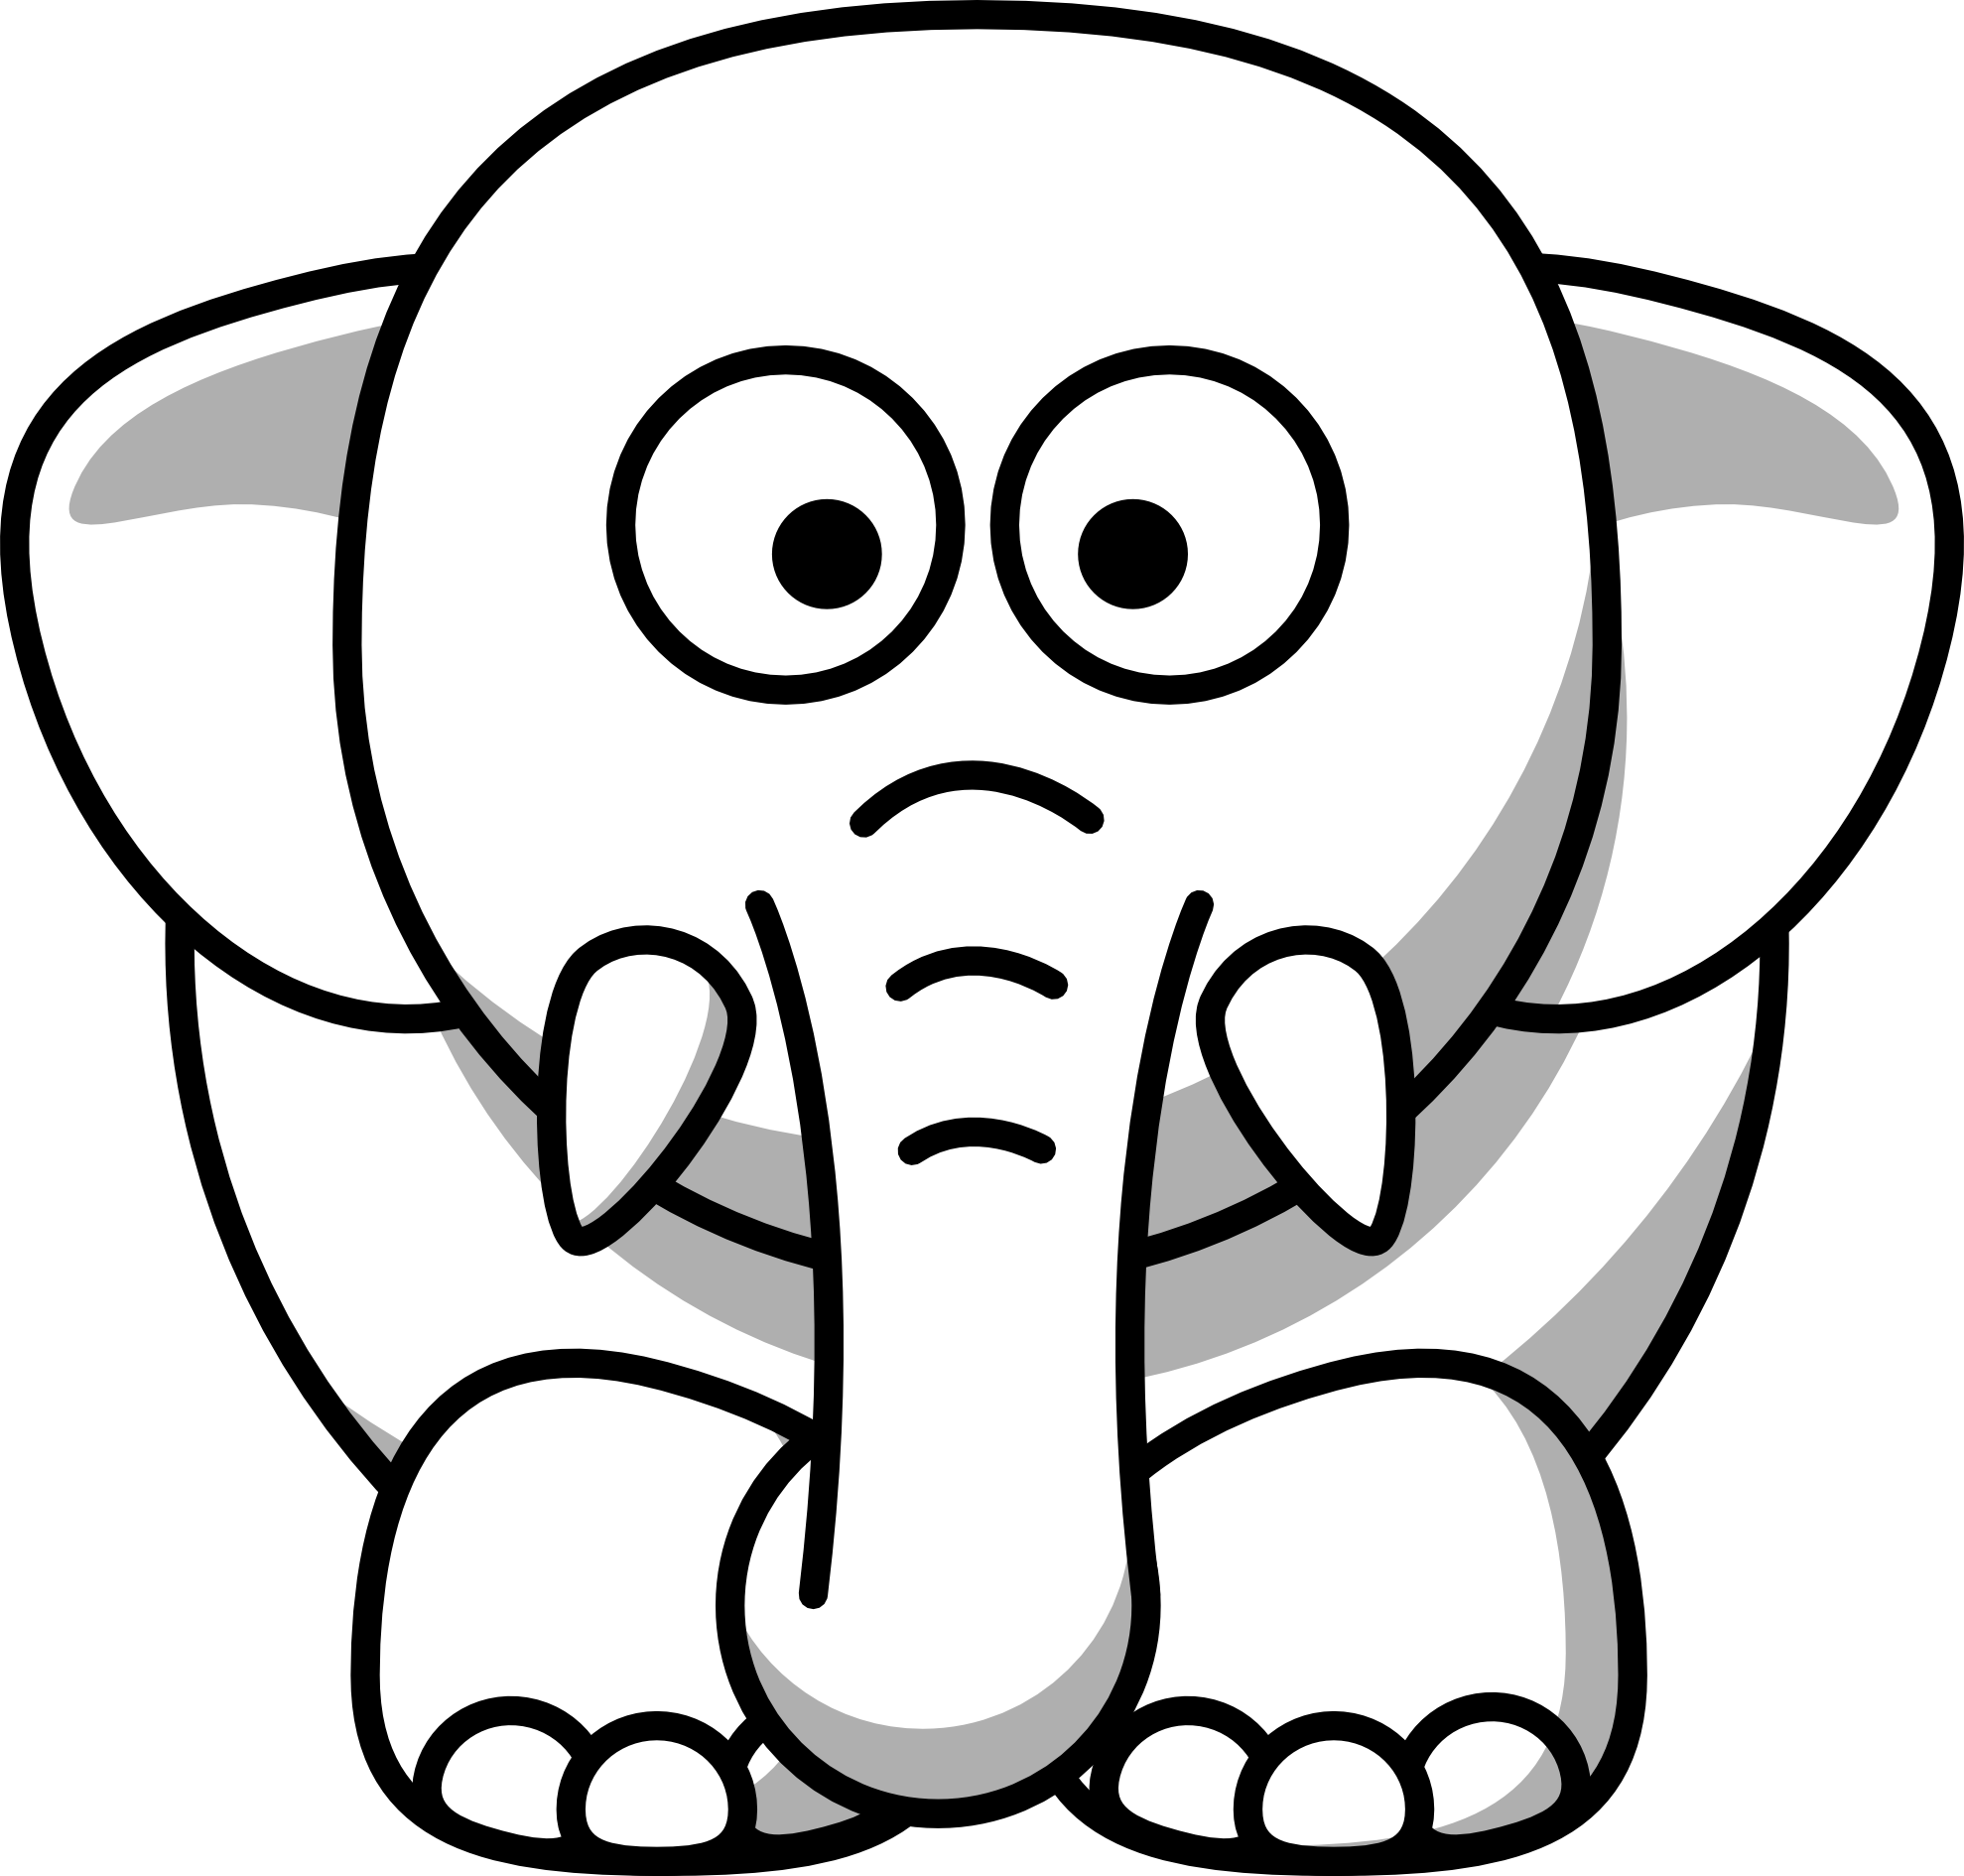 Free Elephant Images Download Free Clip Art  Free Clip 